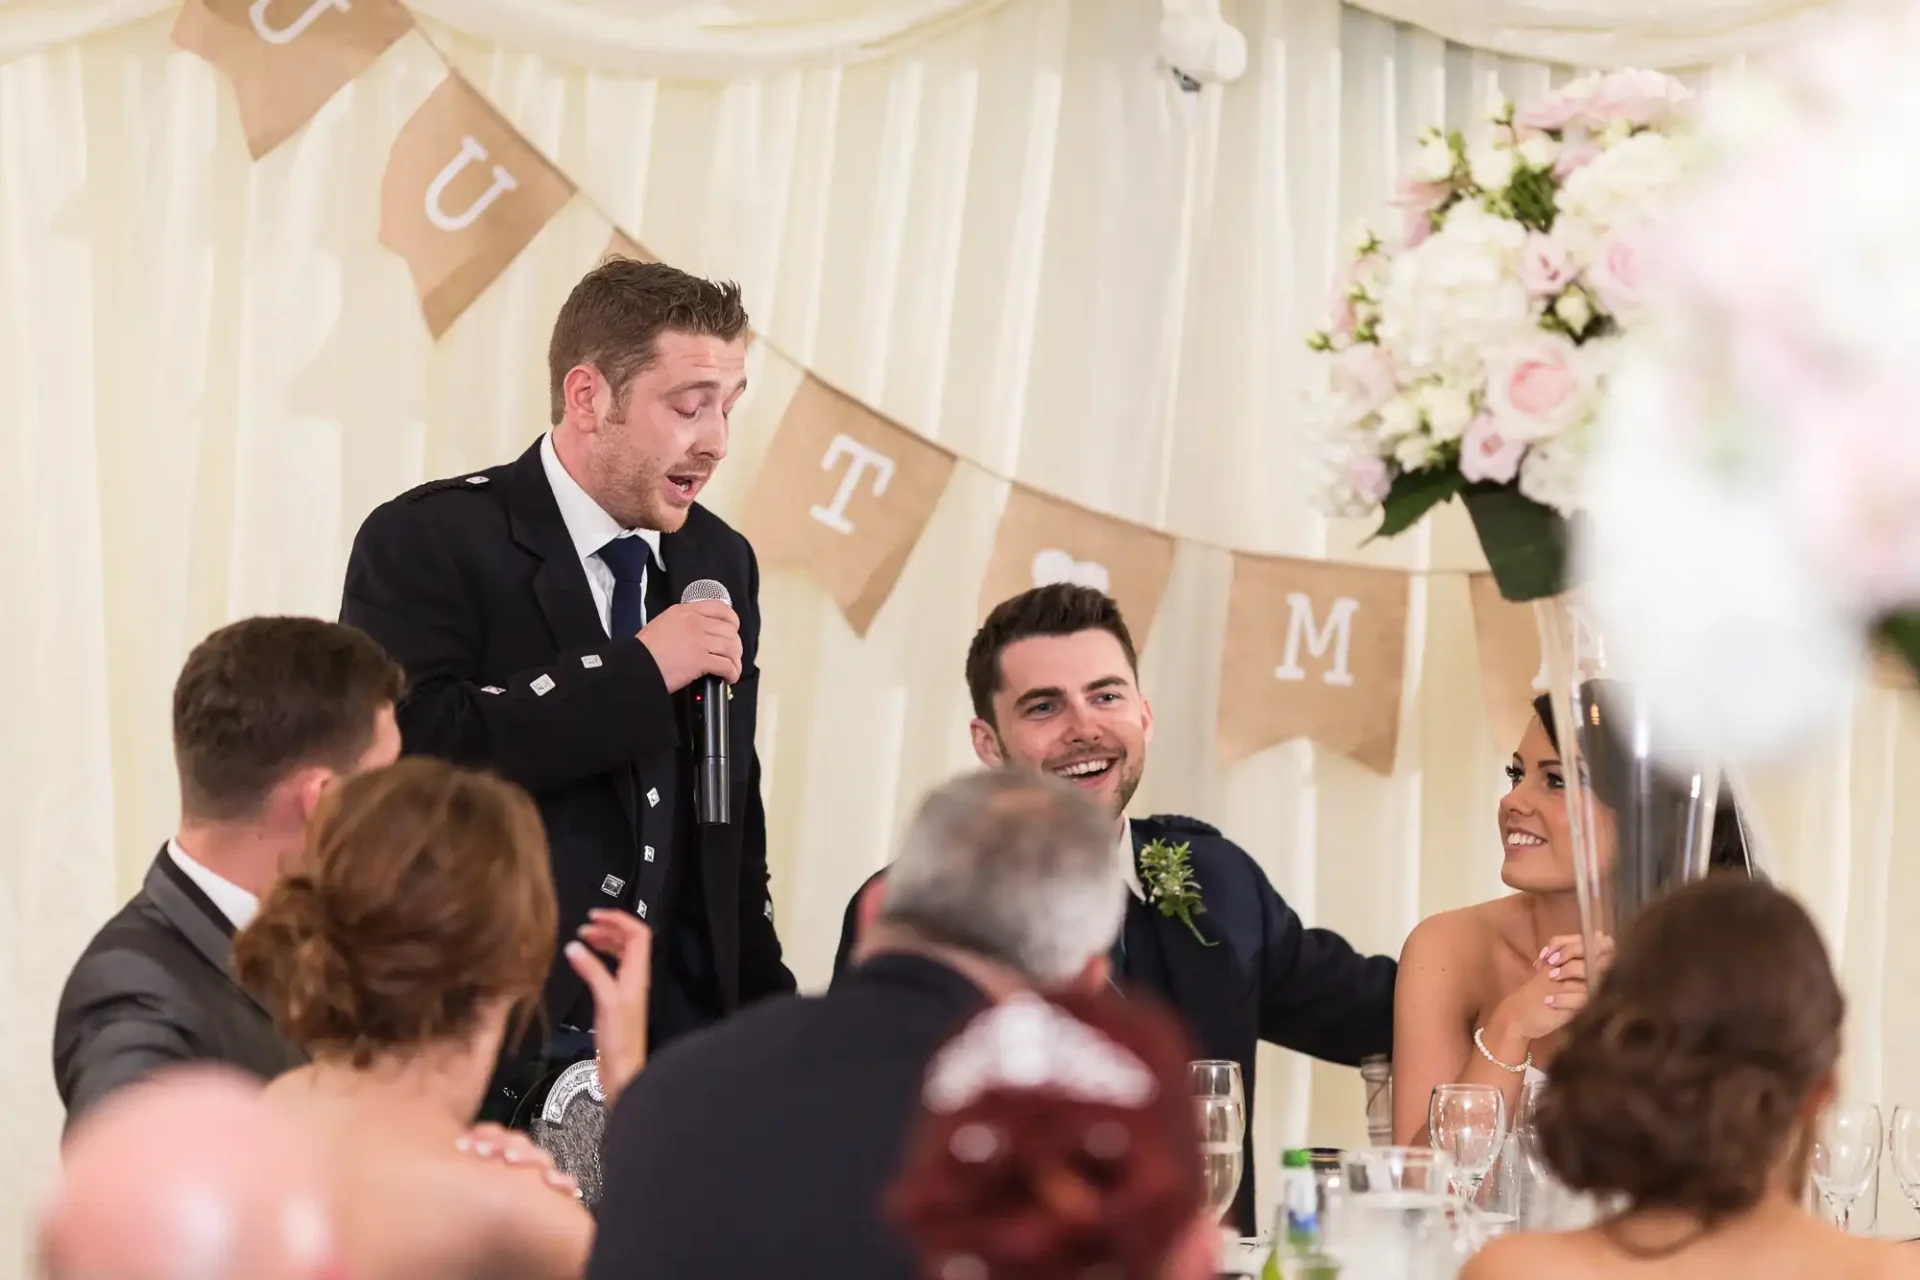 A man in a military uniform gives a speech at a wedding reception, holding a microphone, with guests listening and smiling.